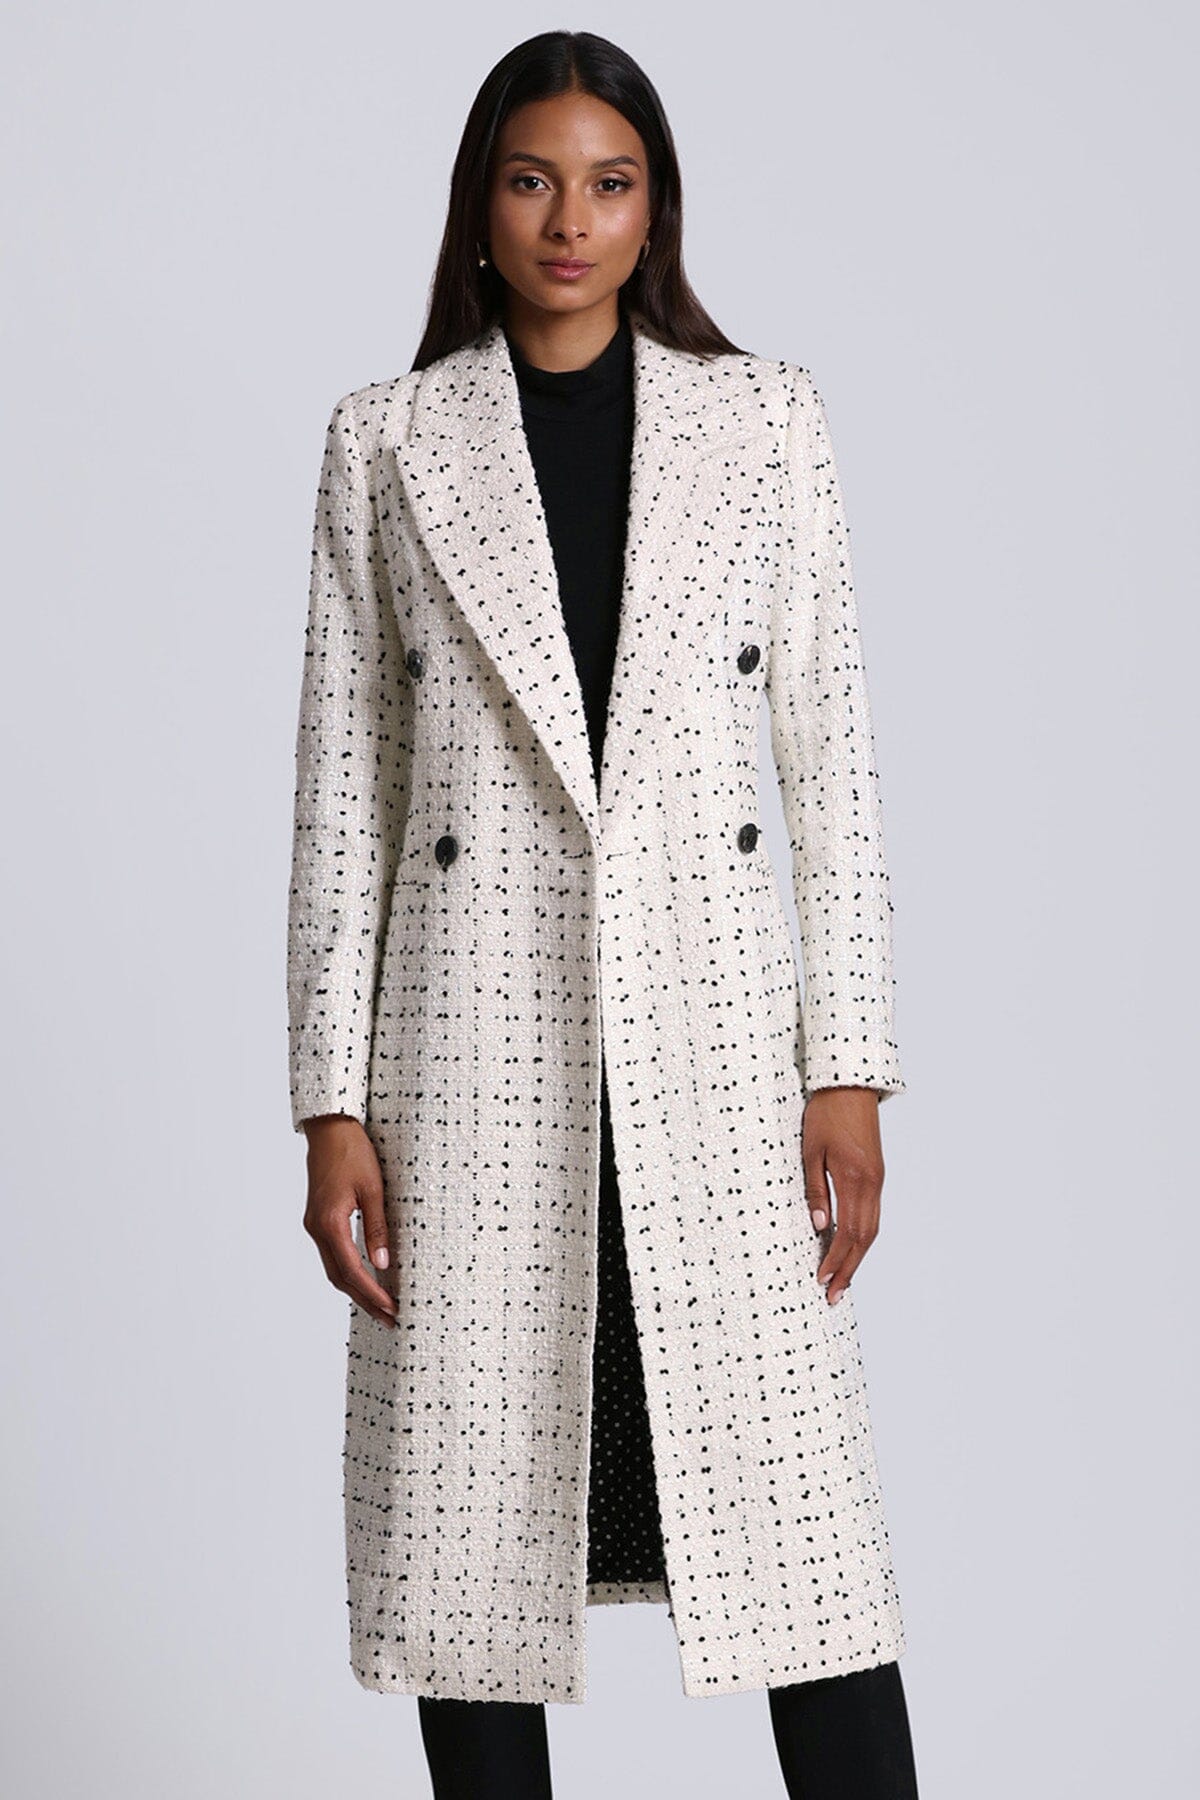 Black and white tweed tailored double breasted longline coat jacket - figure flattering long fall jackets coats for ladies